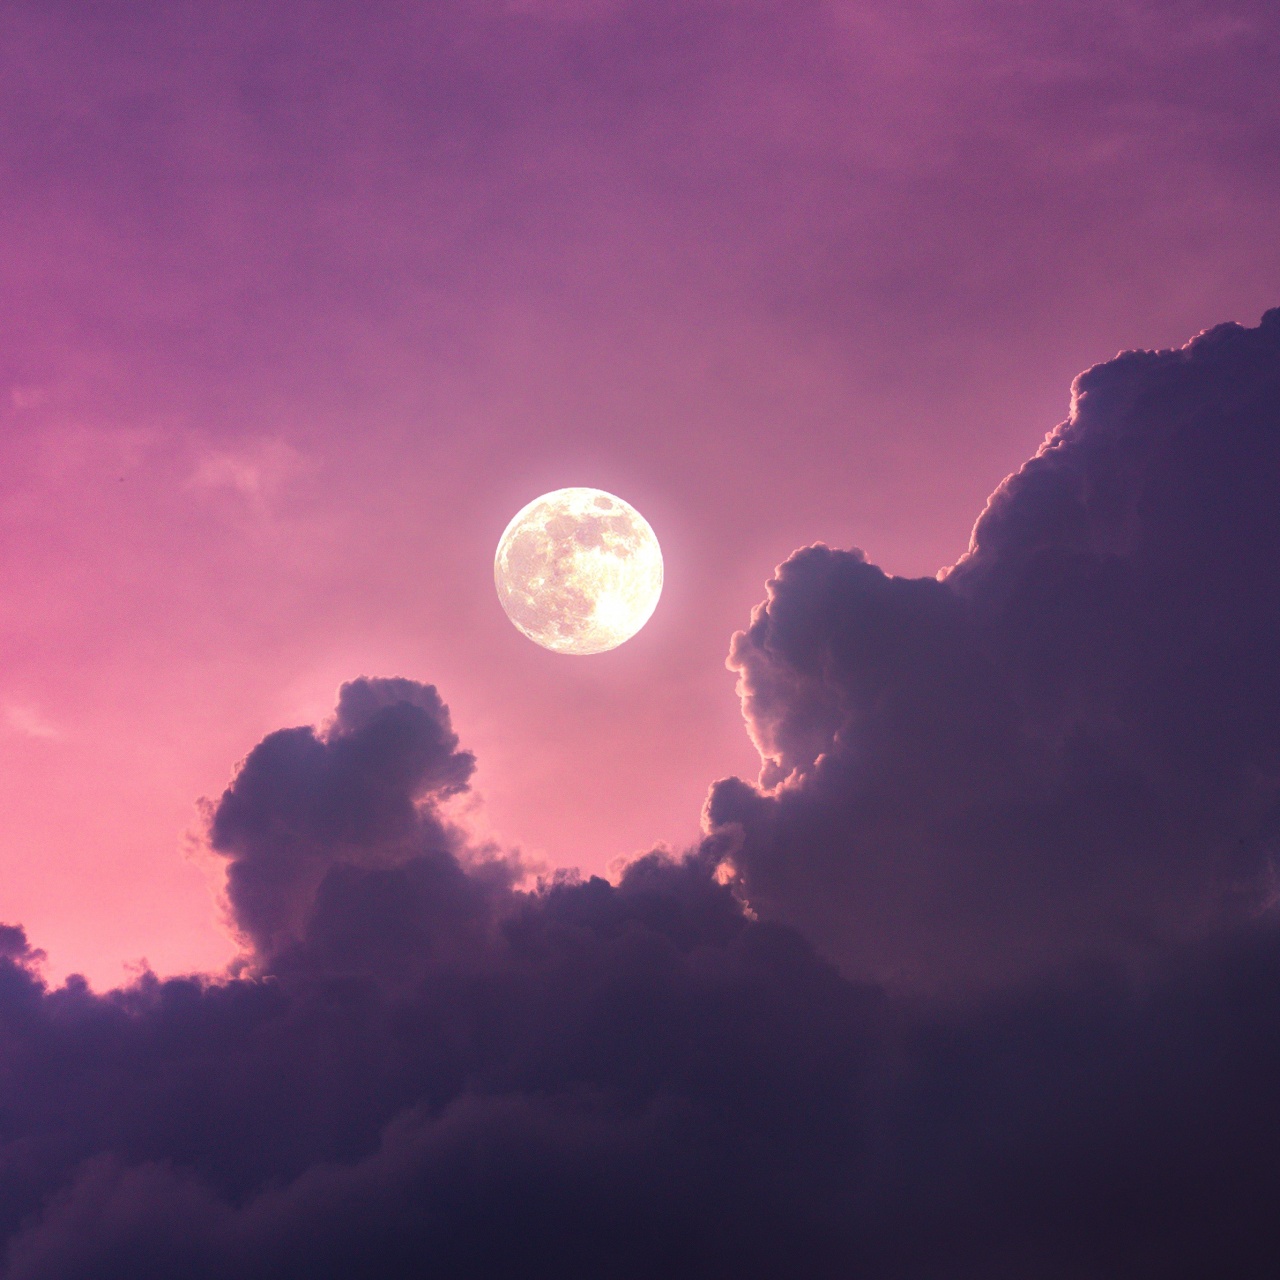 full-moon-clouds-pink-sky-scenic-aesthet